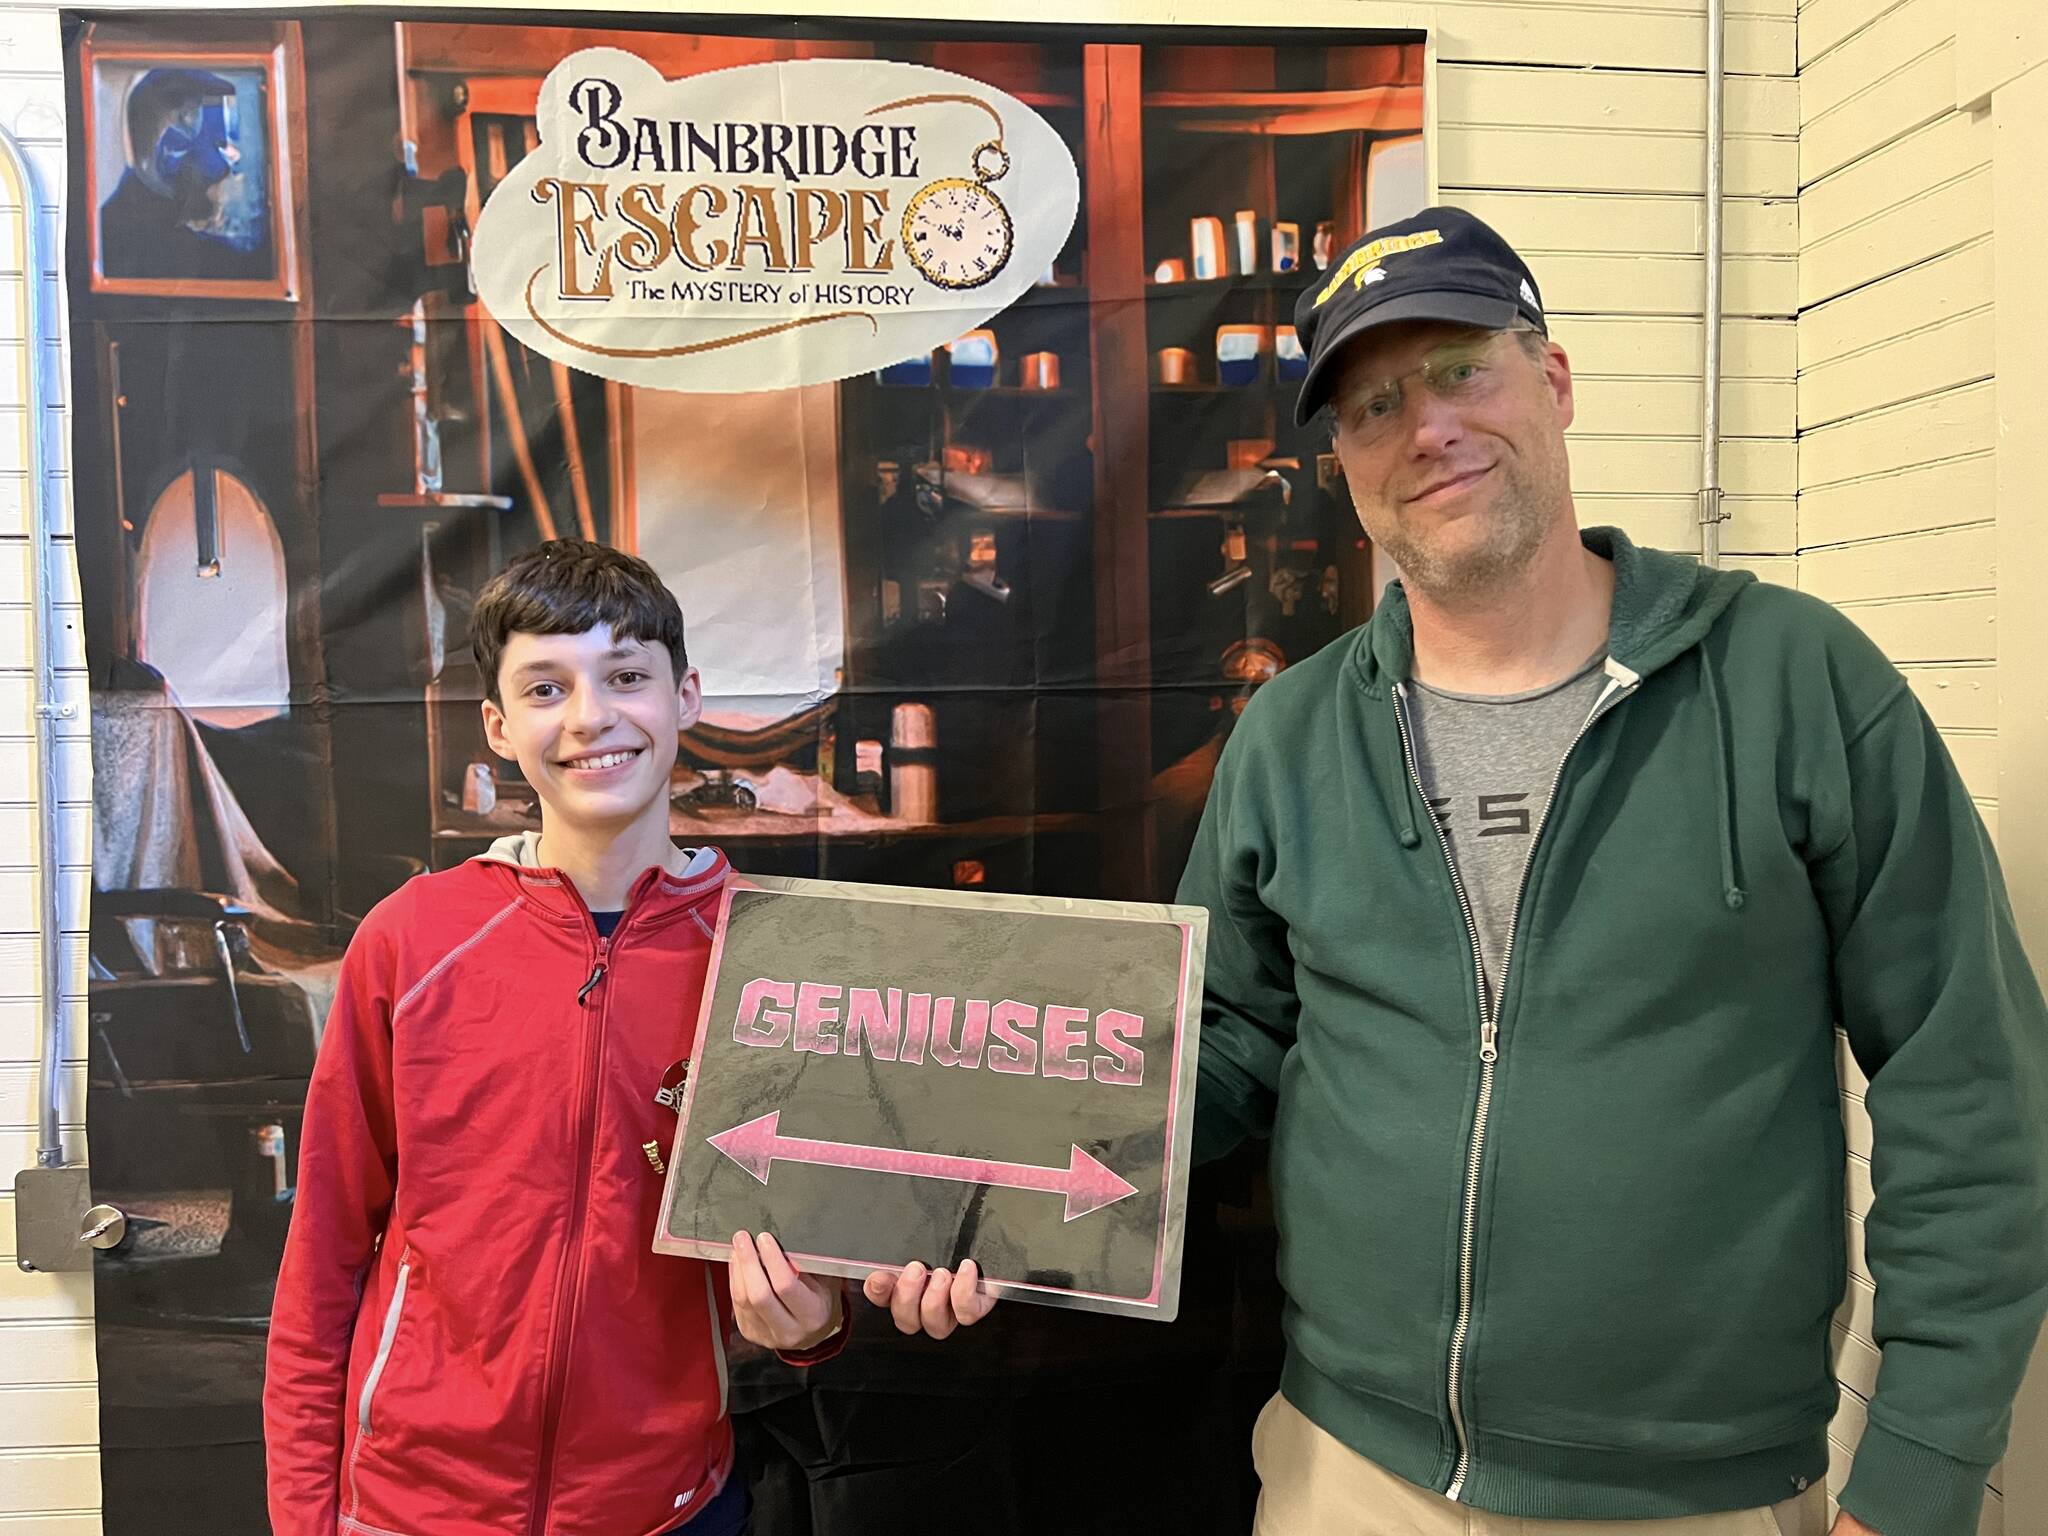 Amateur sleuths Elijah and Doug Treder take a selfie after experiencing the ‘mystery of history’ in the escape room on Winslow Way.